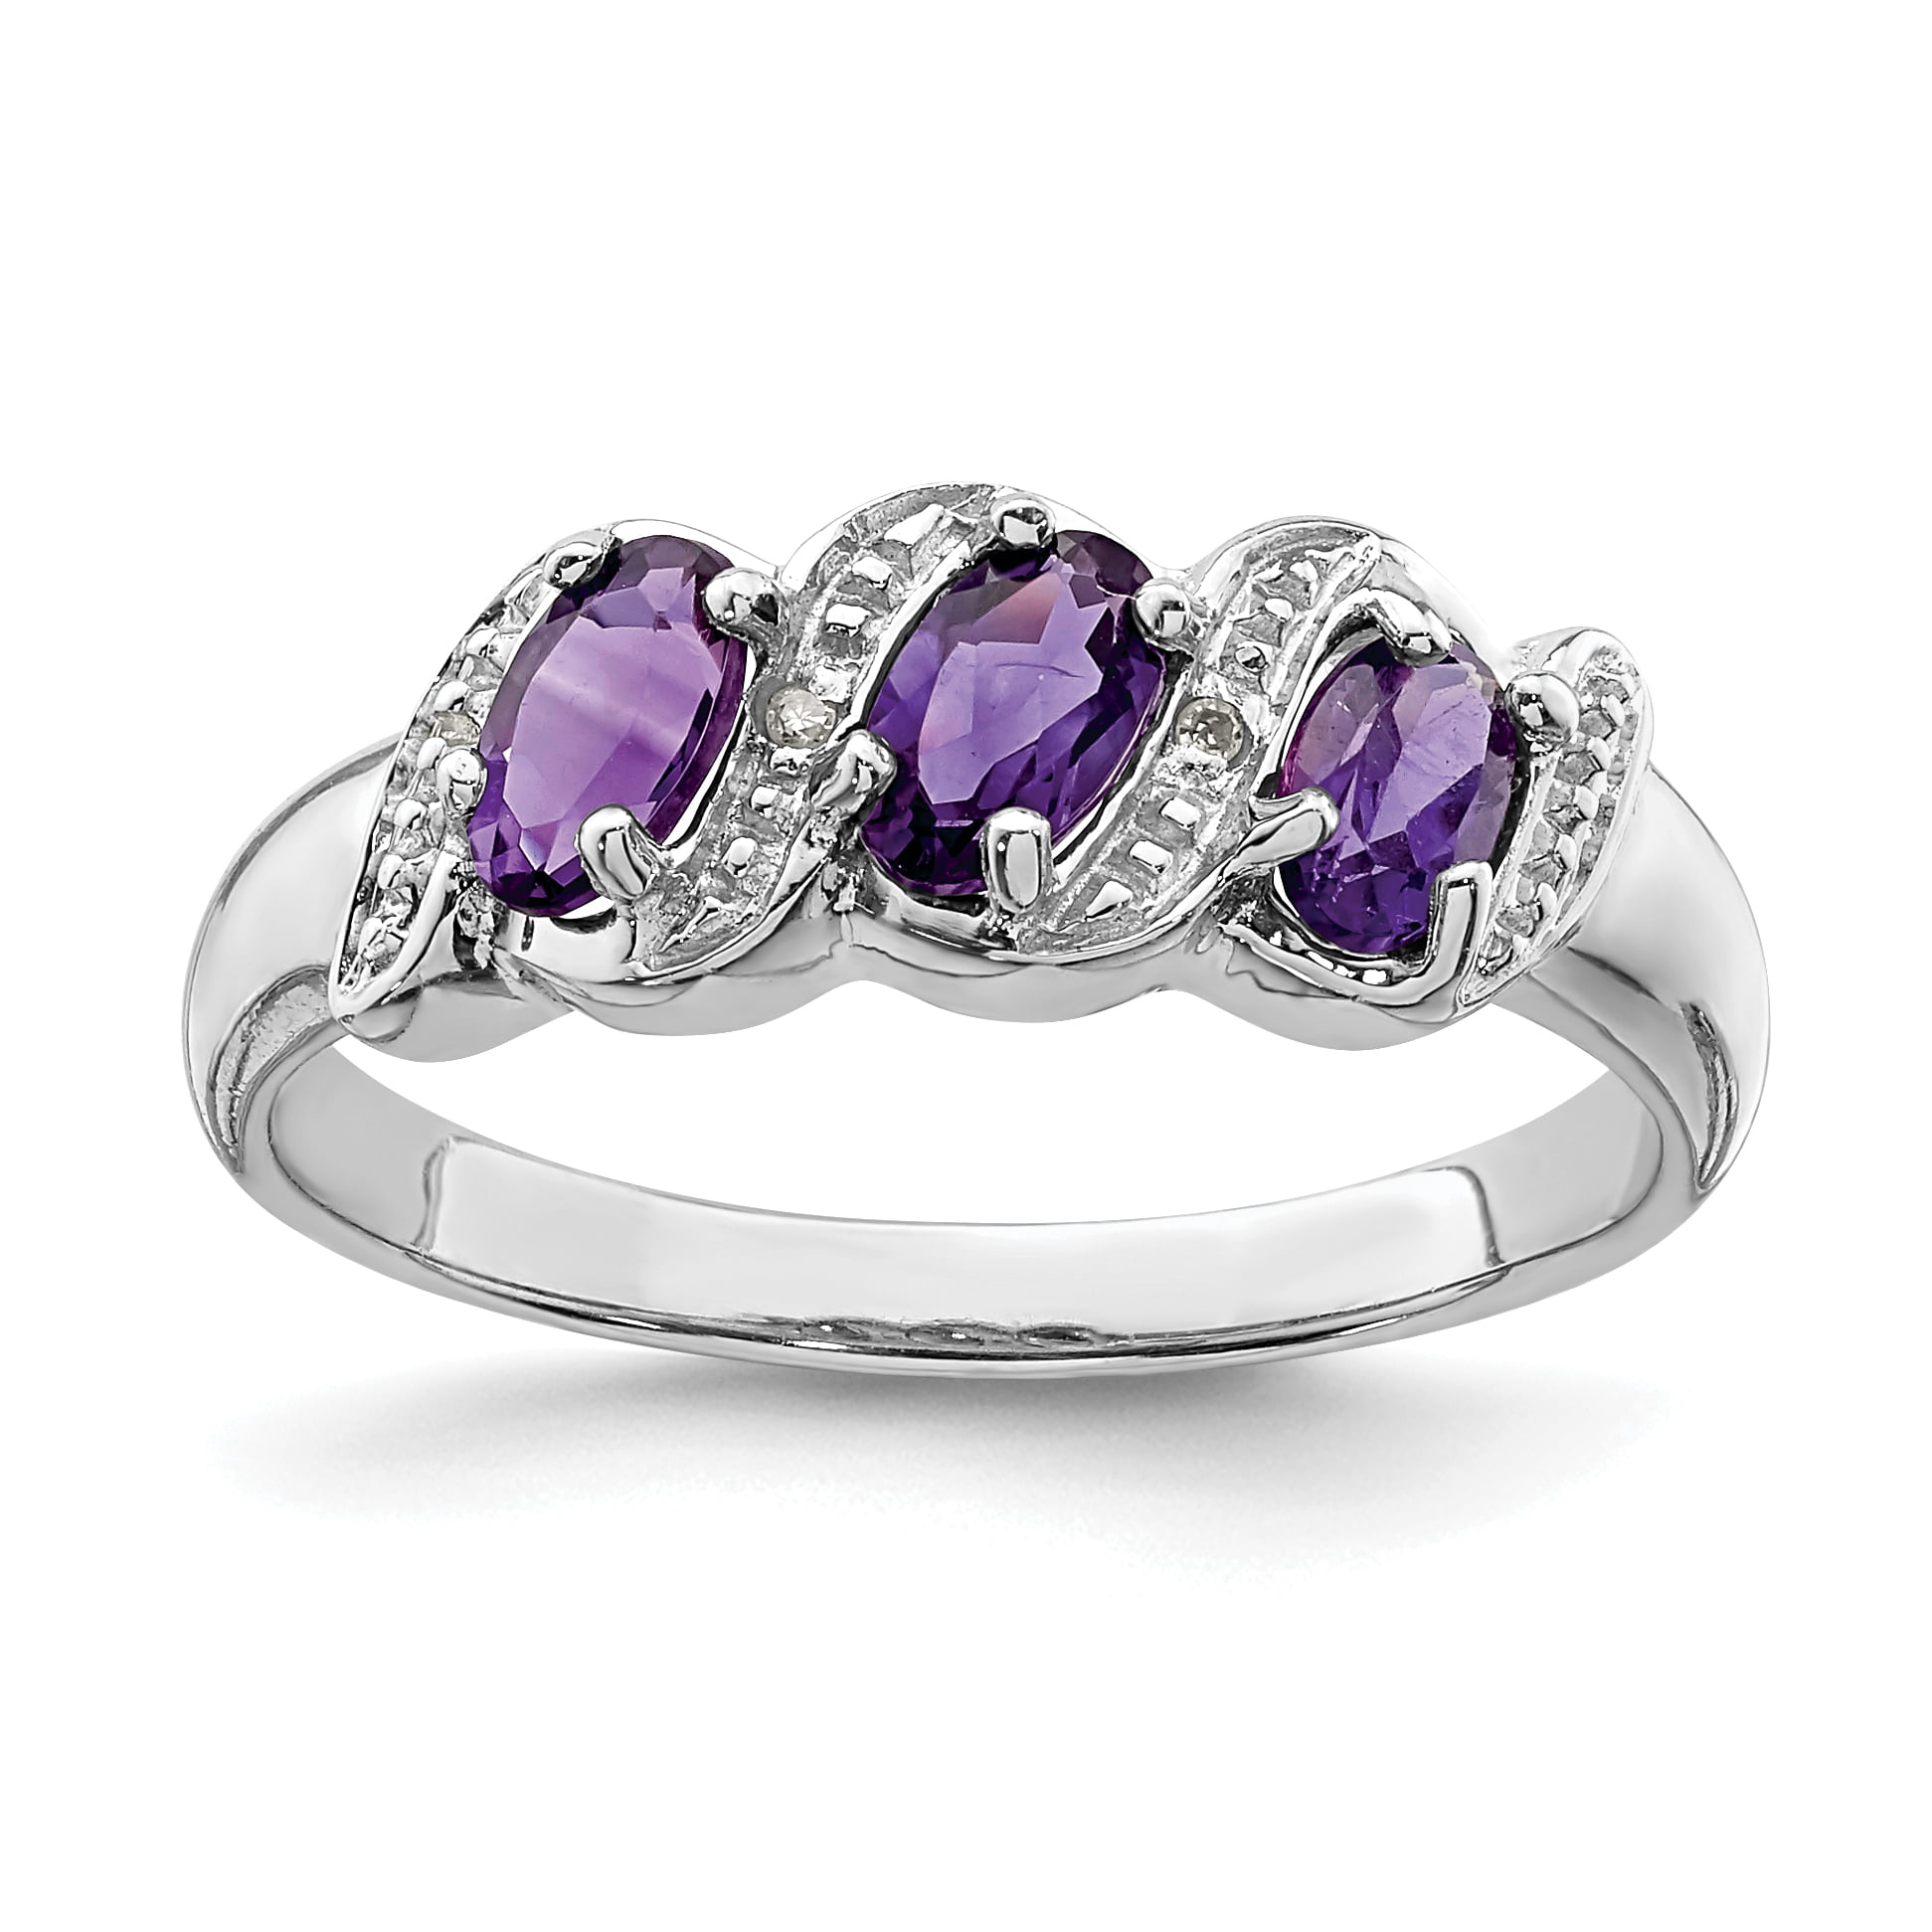 925 Sterling Silver Purple Amethyst Diamond Band Ring Size 7.00 Gemstone Fine Jewelry For Women Gifts For Her